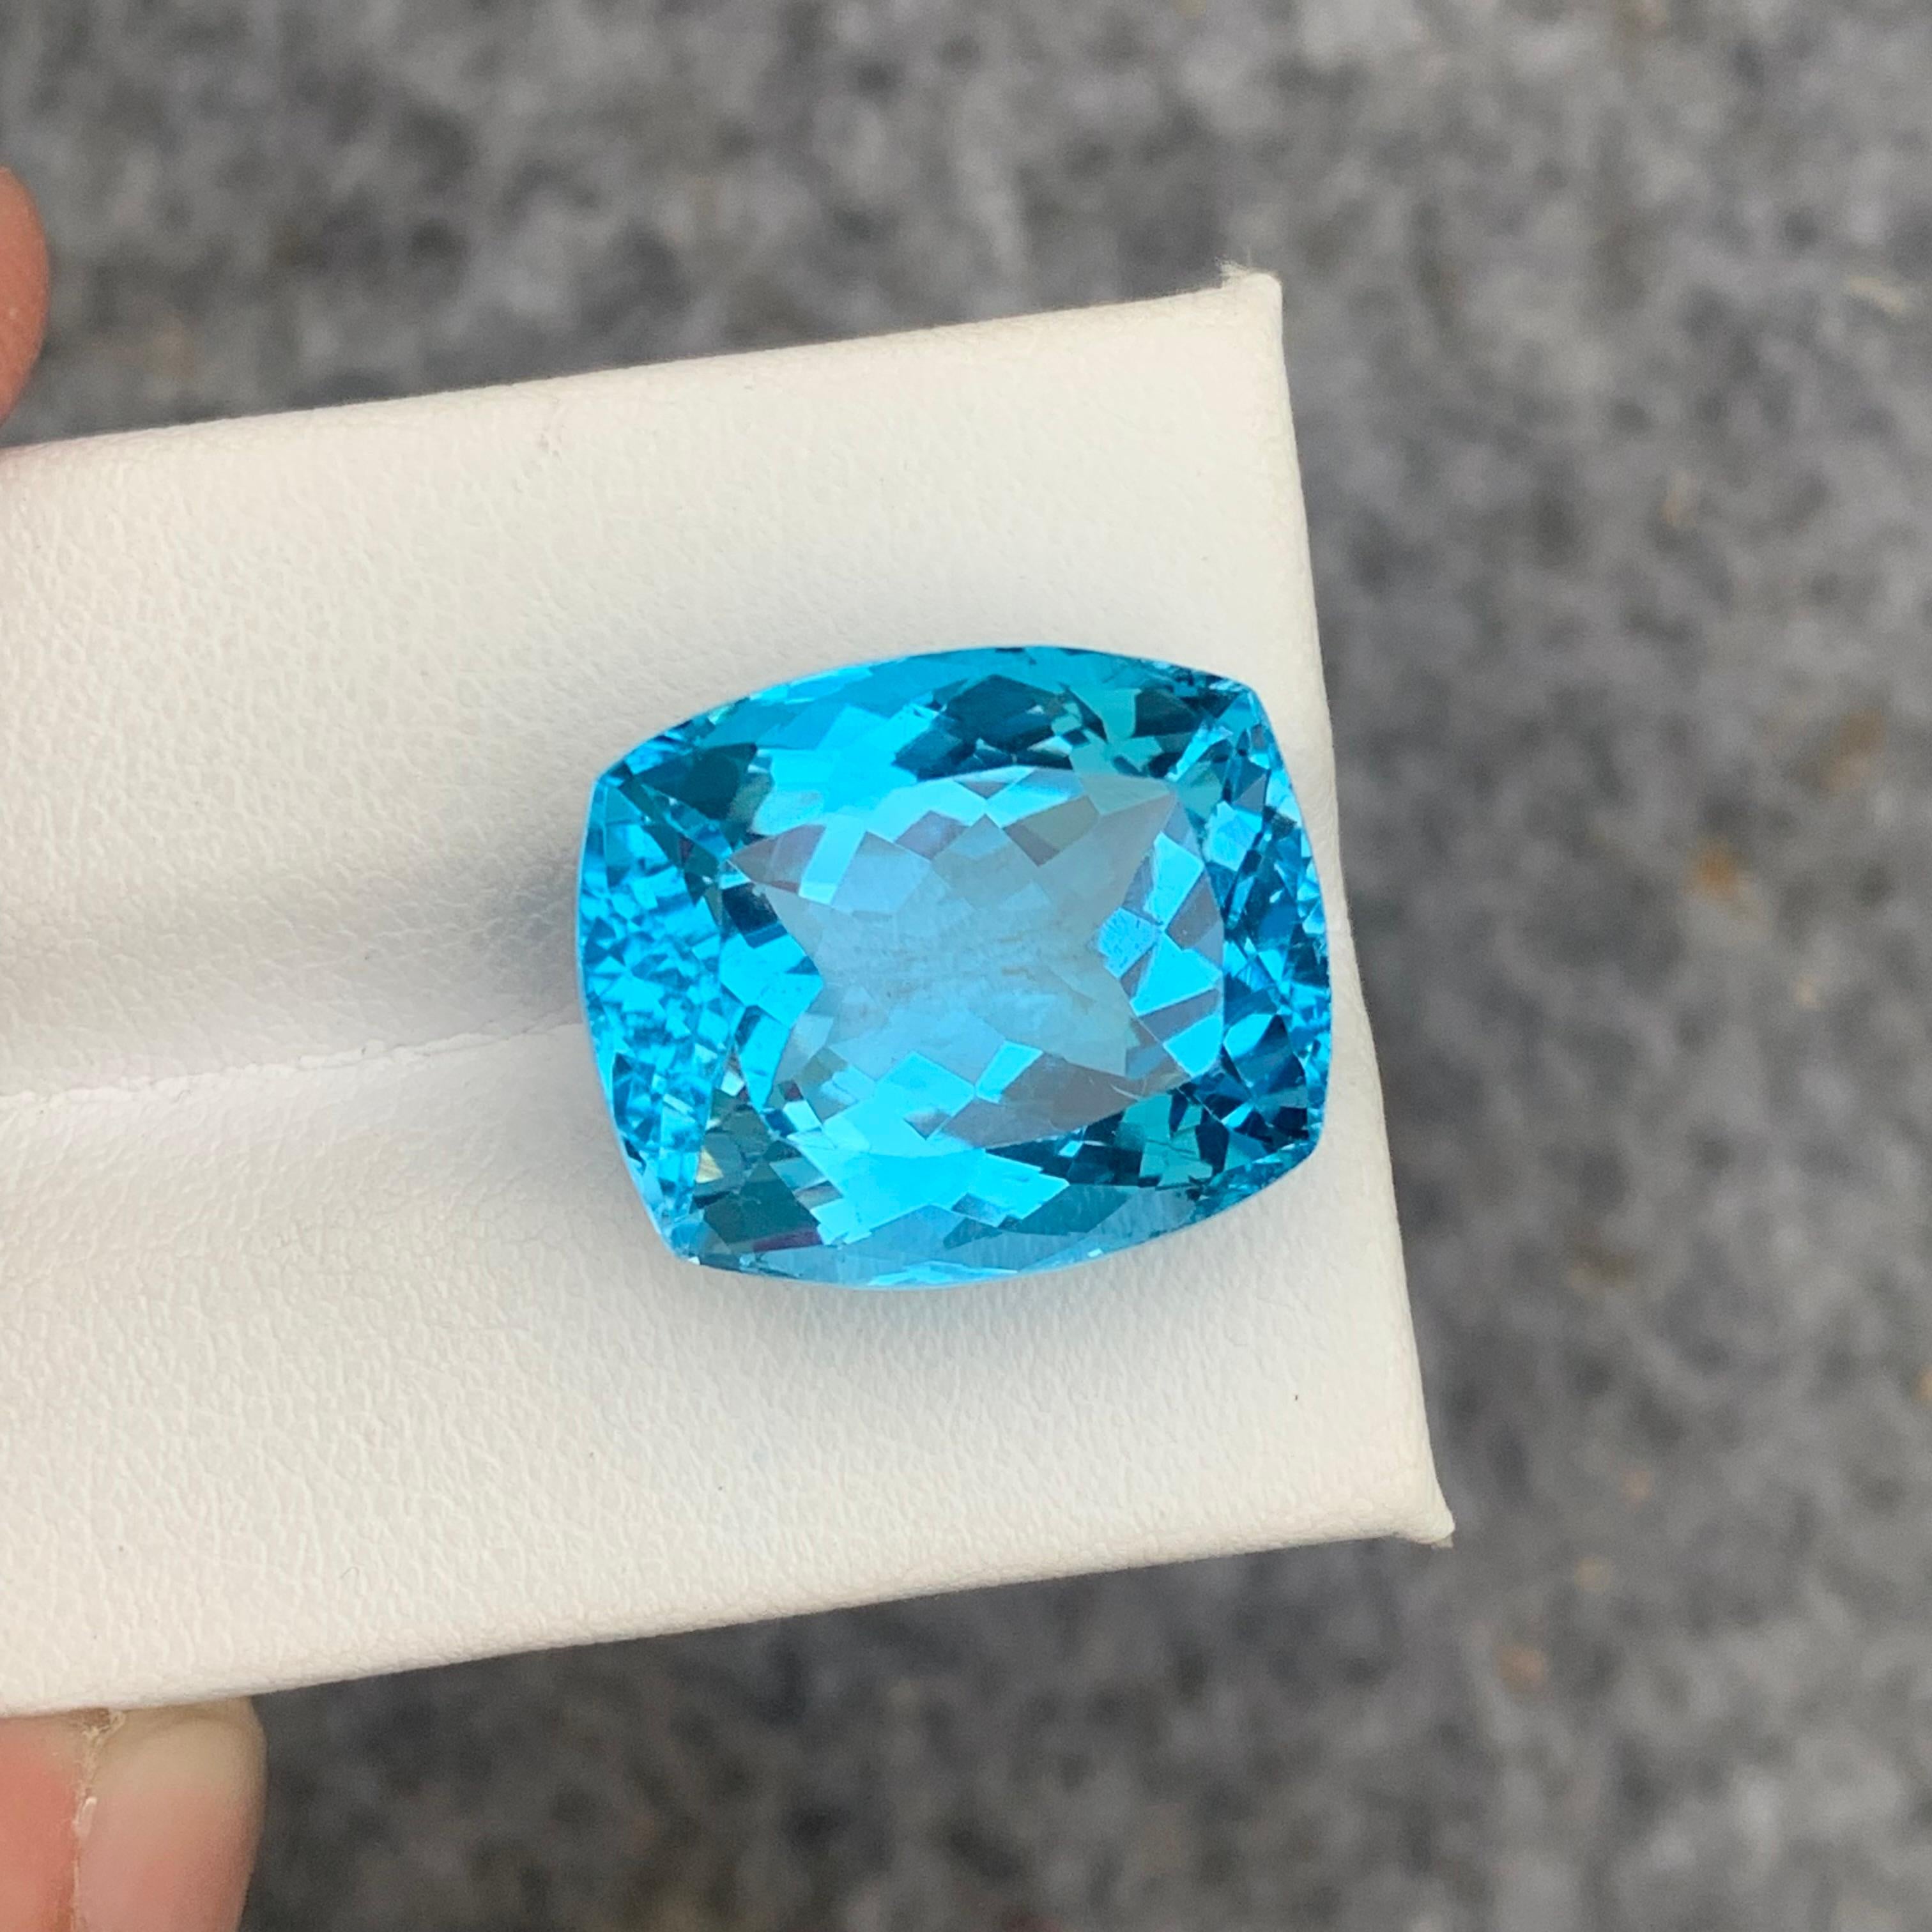 Gorgeous 31.10 Carat Loose Blue Topaz from Brazil Long Cushion Cut for Jewelry 3